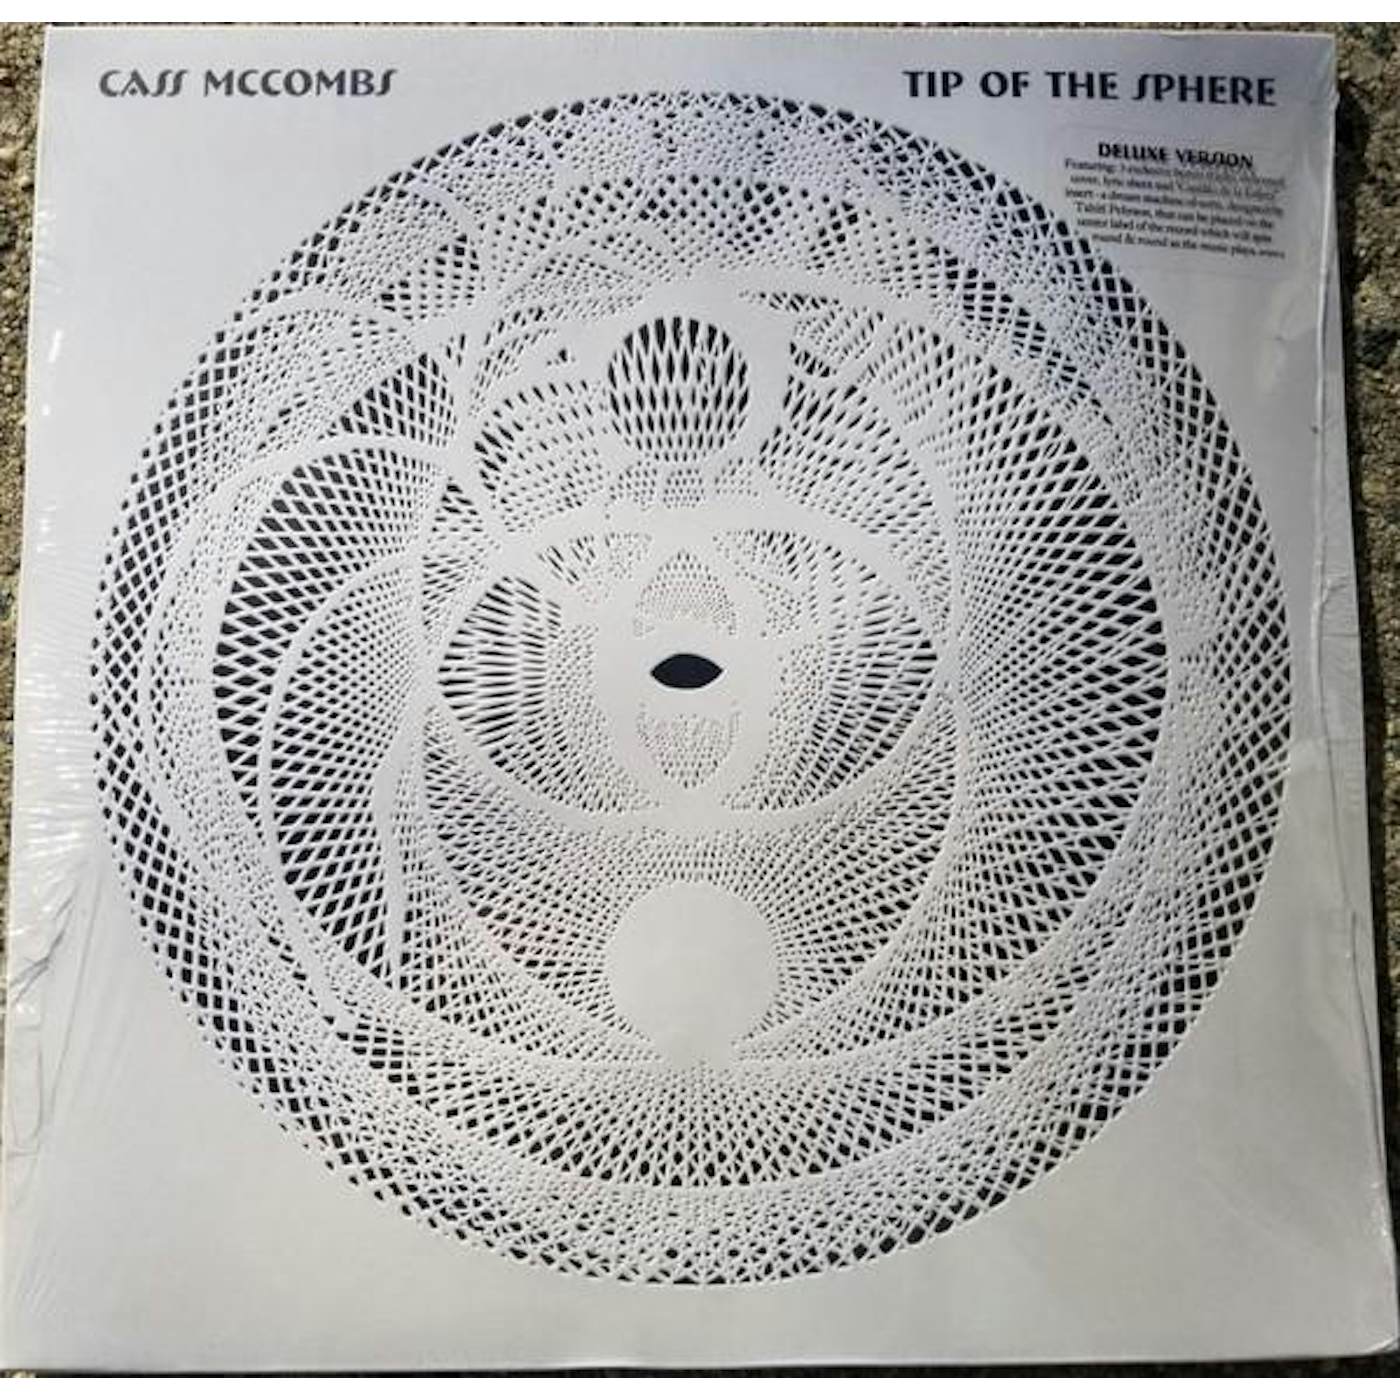 Cass McCombs TIP OF THE SPHERE (DELUXE) Vinyl Record